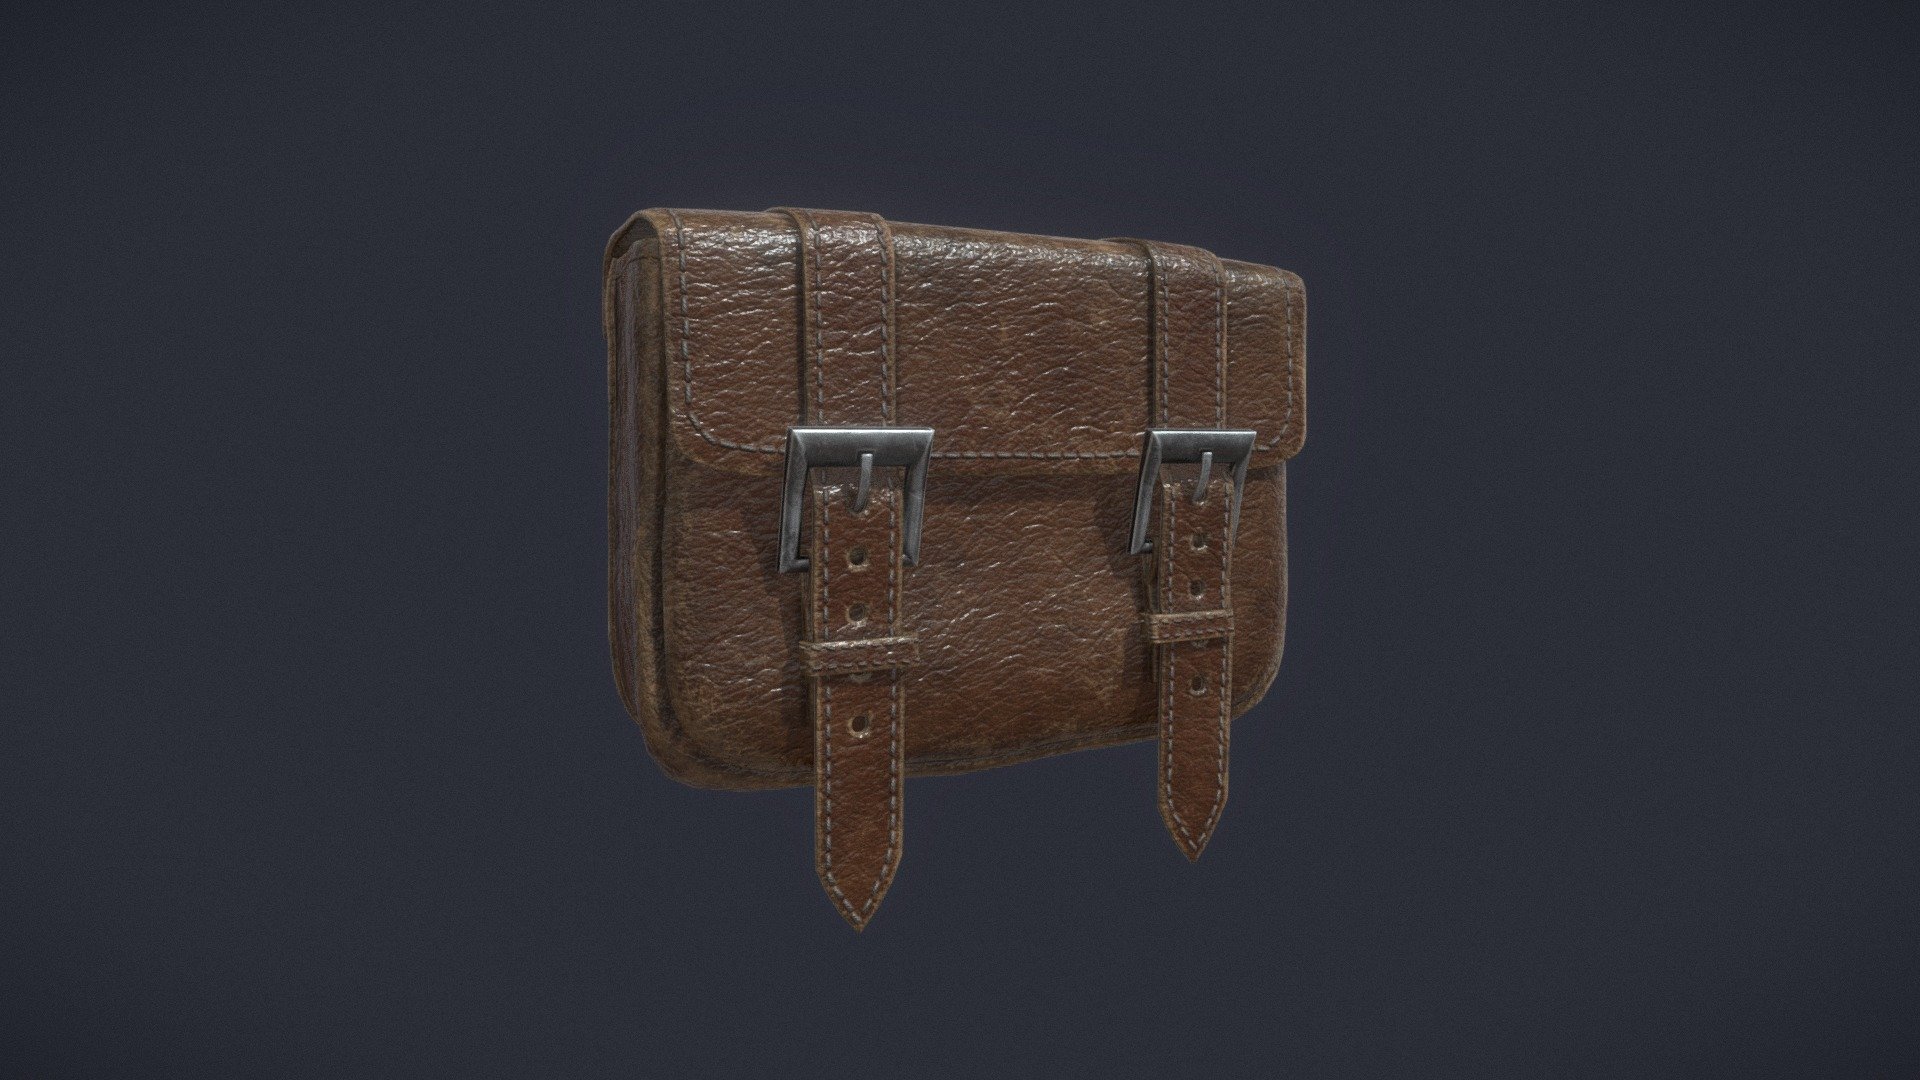 Medieval Bag 3D Model PBR Texture available - Medieval_Bag - Buy Royalty Free 3D model by GetDeadEntertainment 3d model